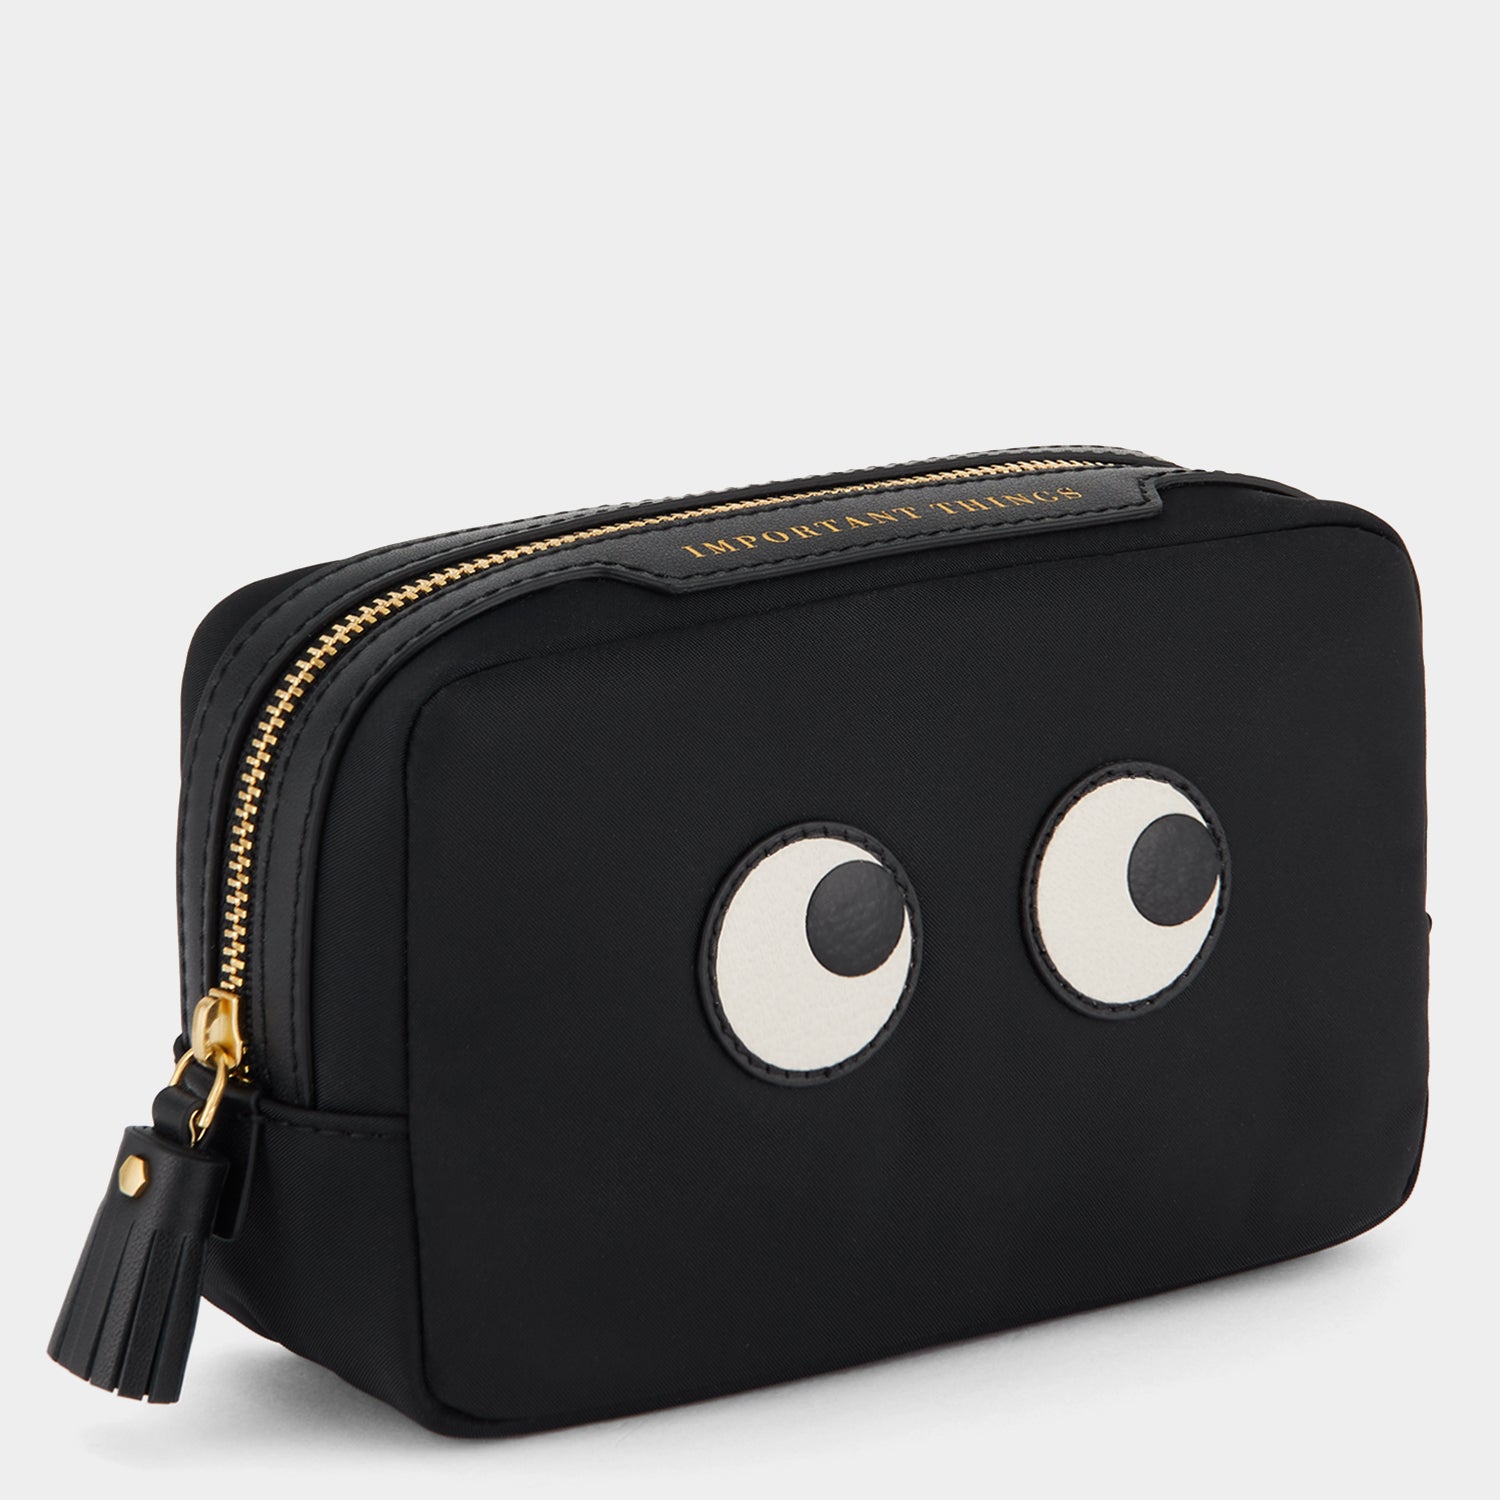 Anya Hindmarch Card Case Coin Purse Leather Black Eyes Simple Unique  Accessory | eBay